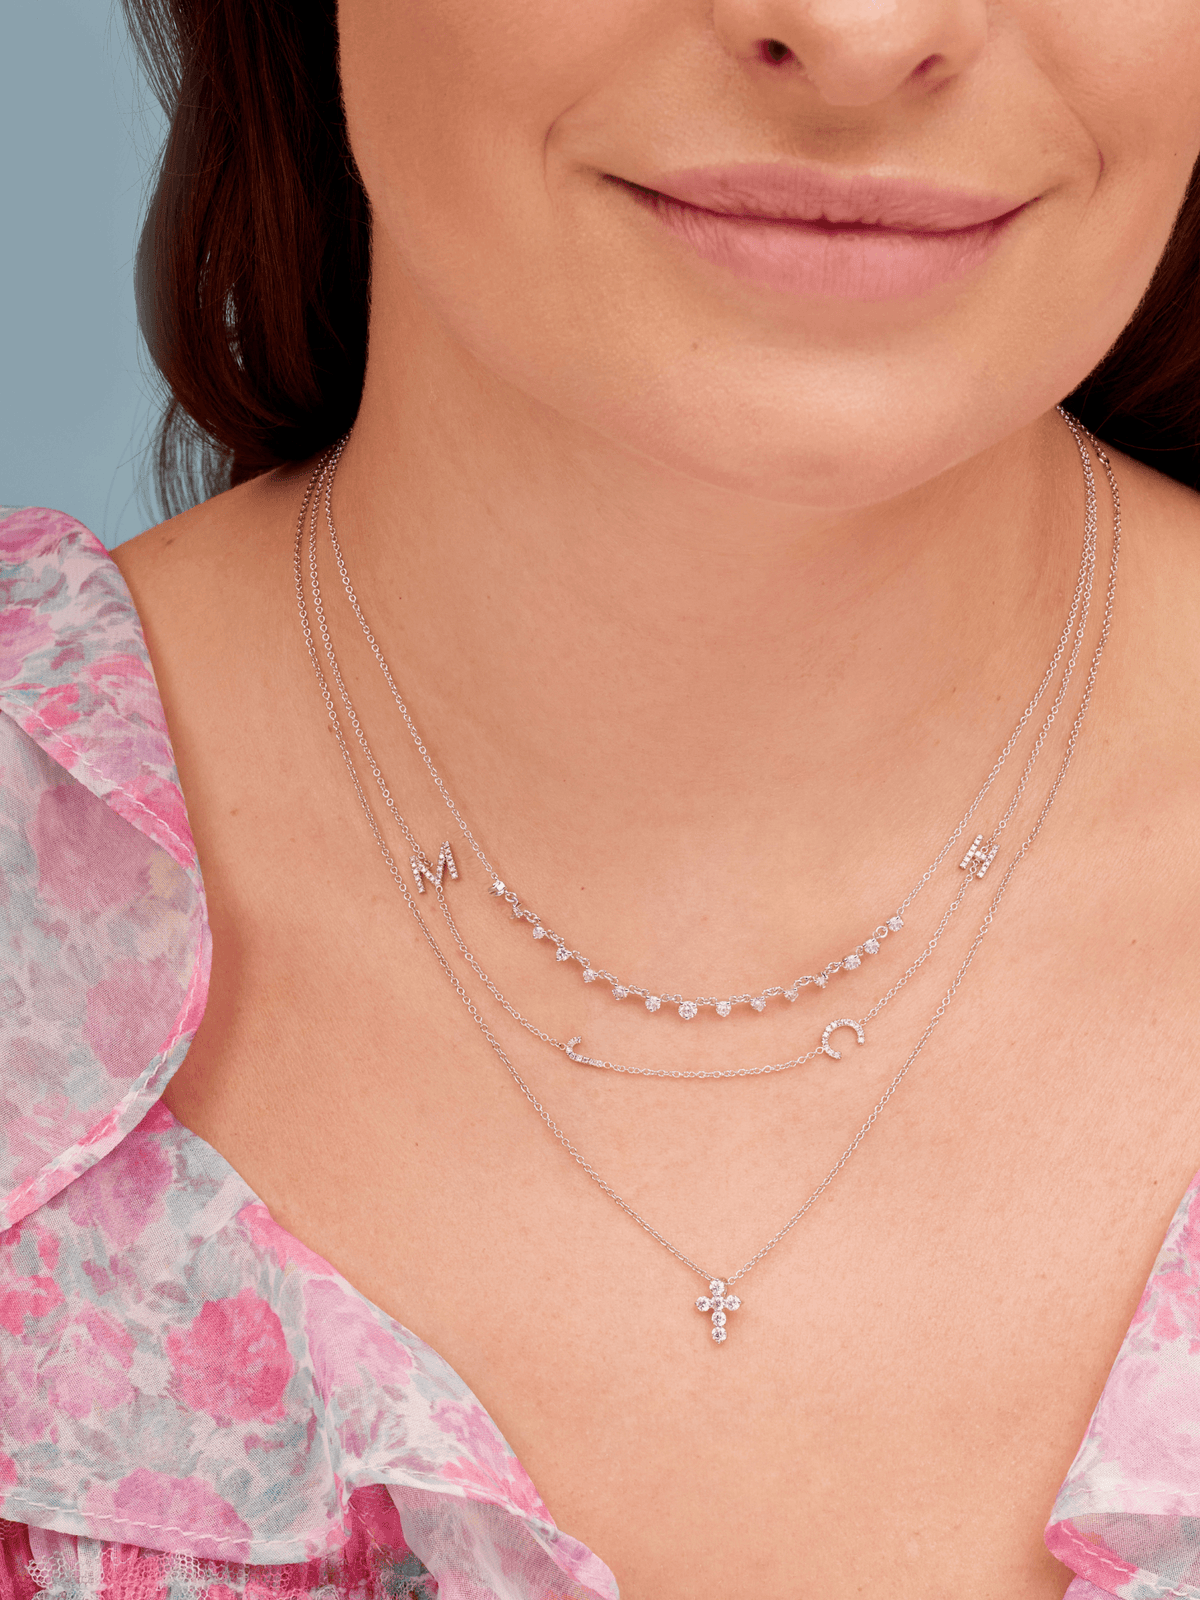 Dainty white gold chain with four diamond initial charms layered with dainty white gold diamond cross necklace and white gold diamond layering necklace